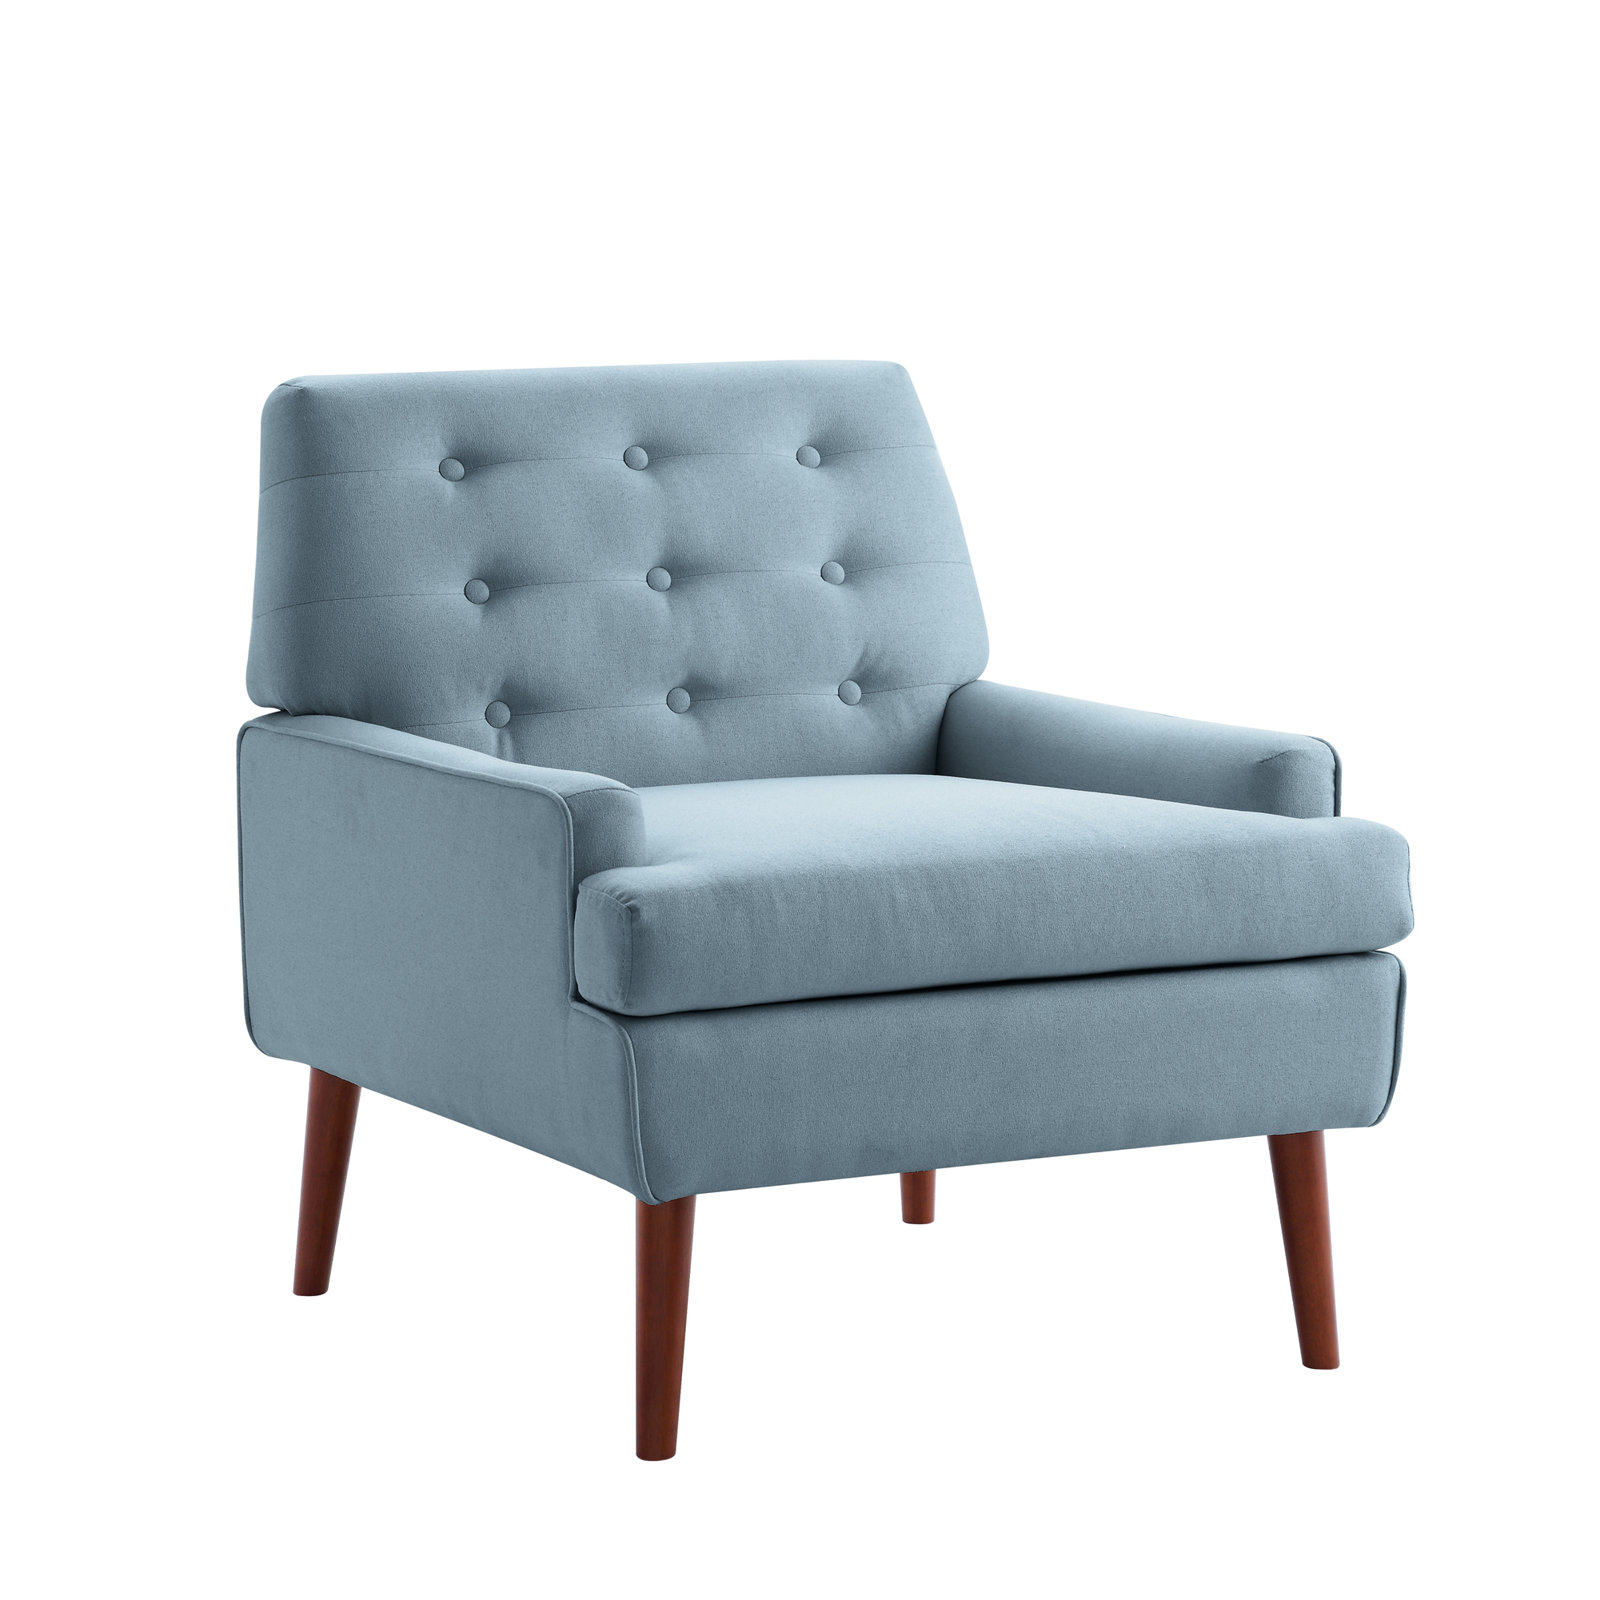 George Oliver Goughf Upholstered Accent Chair